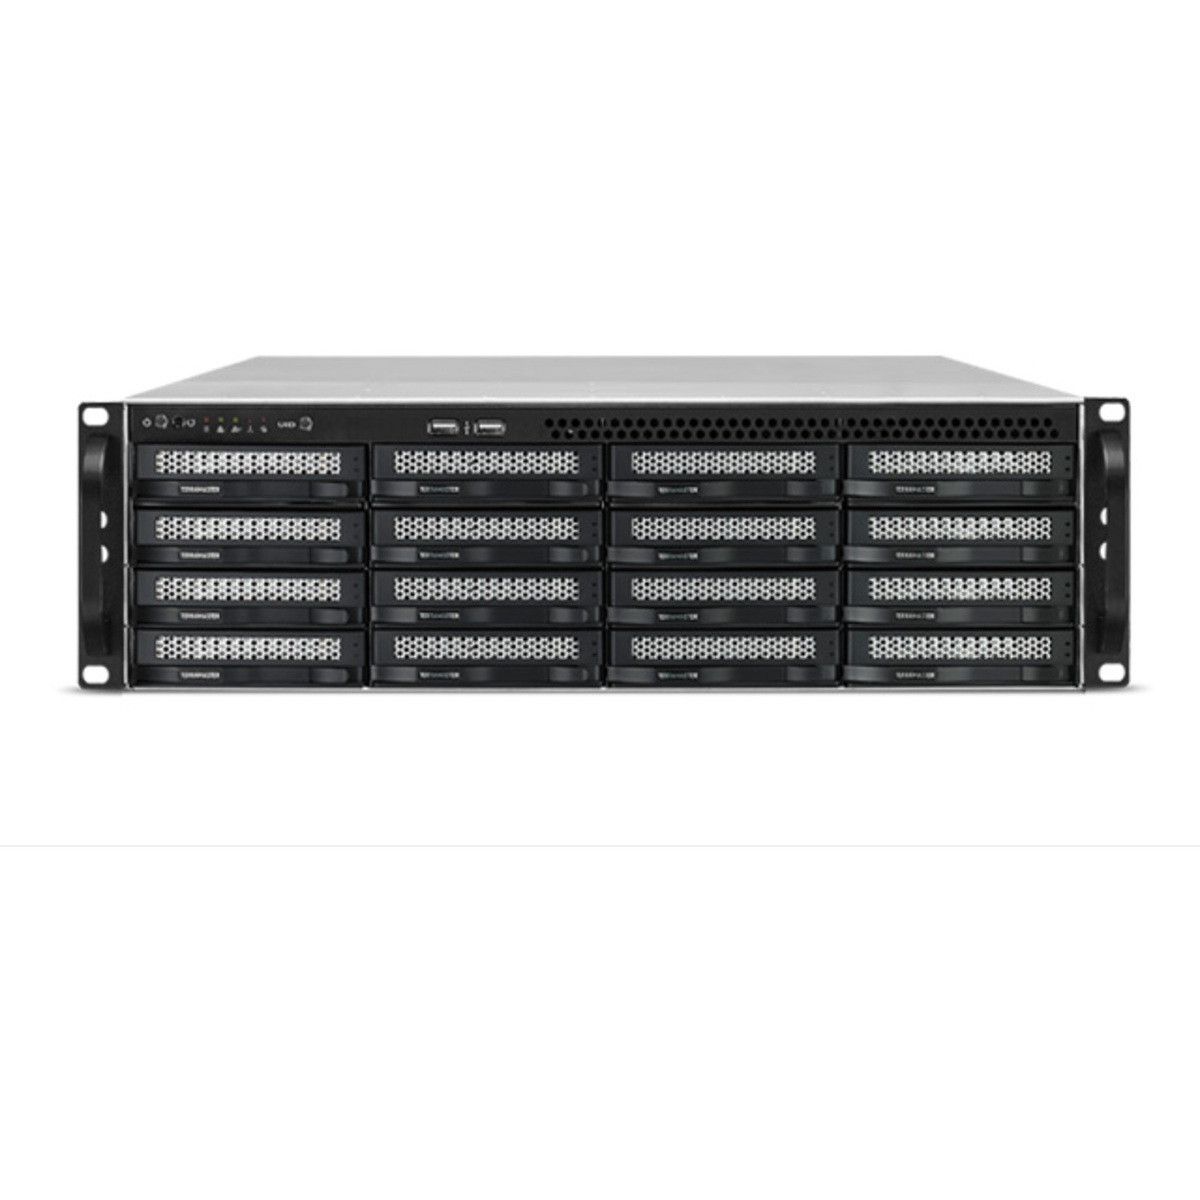 TerraMaster U16-722-2224 72tb 16-Bay RackMount Large Business / Enterprise NAS - Network Attached Storage Device 12x6tb Western Digital Red Plus WD60EFPX 3.5 5640rpm SATA 6Gb/s HDD NAS Class Drives Installed - Burn-In Tested U16-722-2224